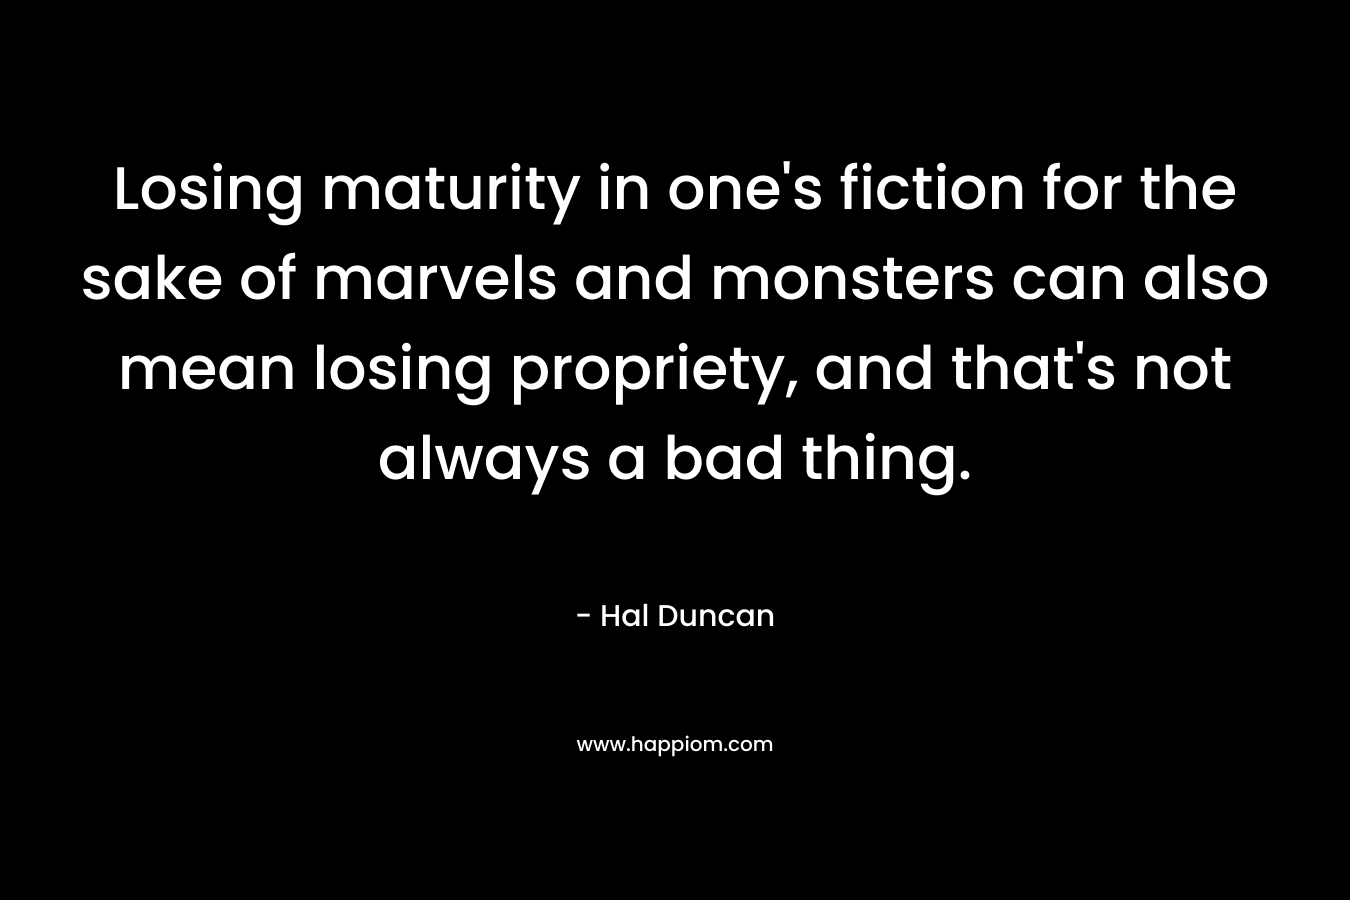 Losing maturity in one's fiction for the sake of marvels and monsters can also mean losing propriety, and that's not always a bad thing.